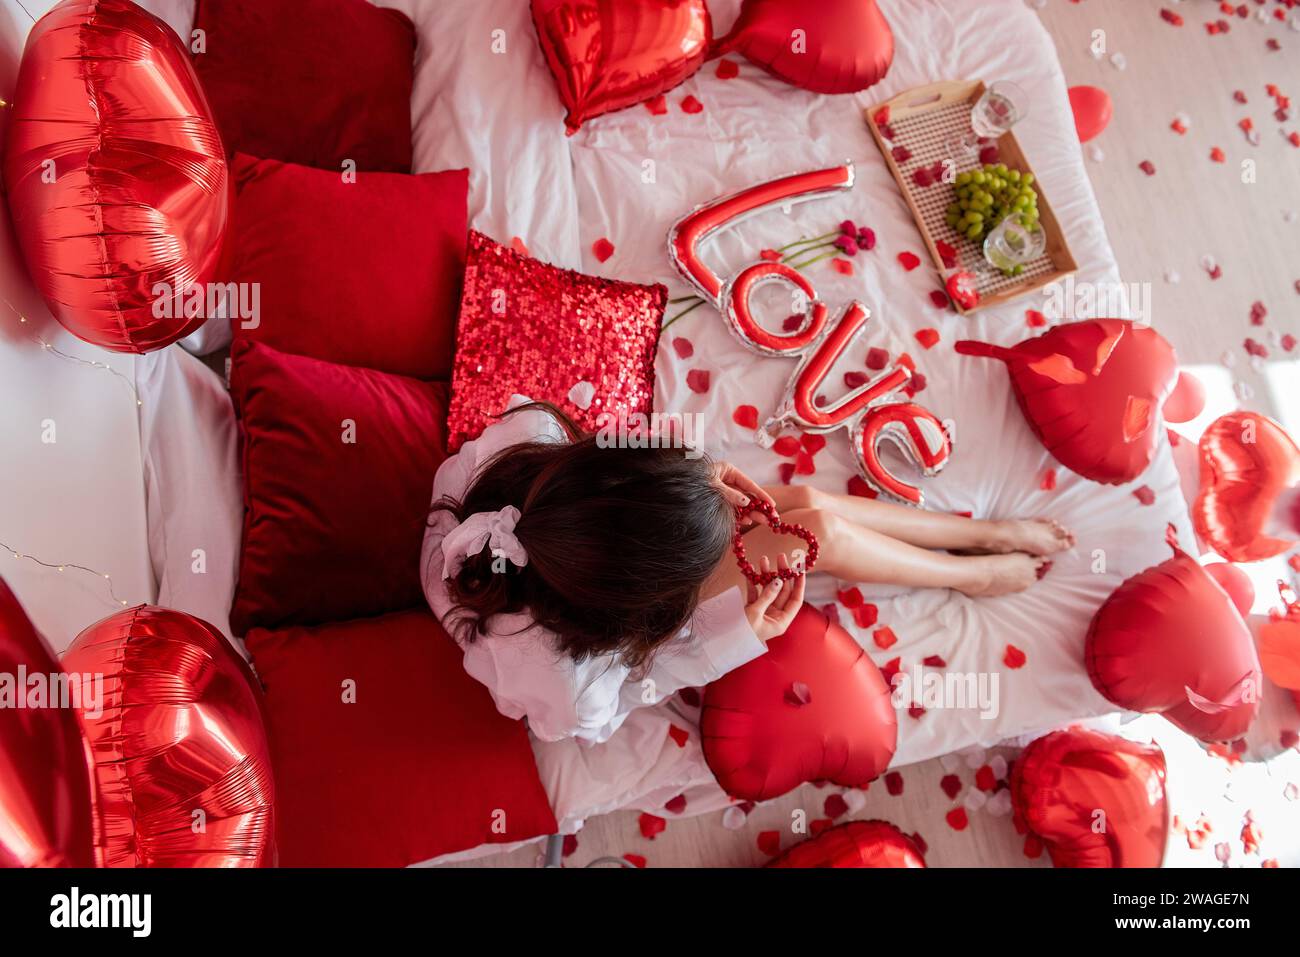 Top view of young woman sitting on bed around red balloons, rose petals. Faceless blogger holds heart-shaped beads. Decoration with inscription Love, Stock Photo